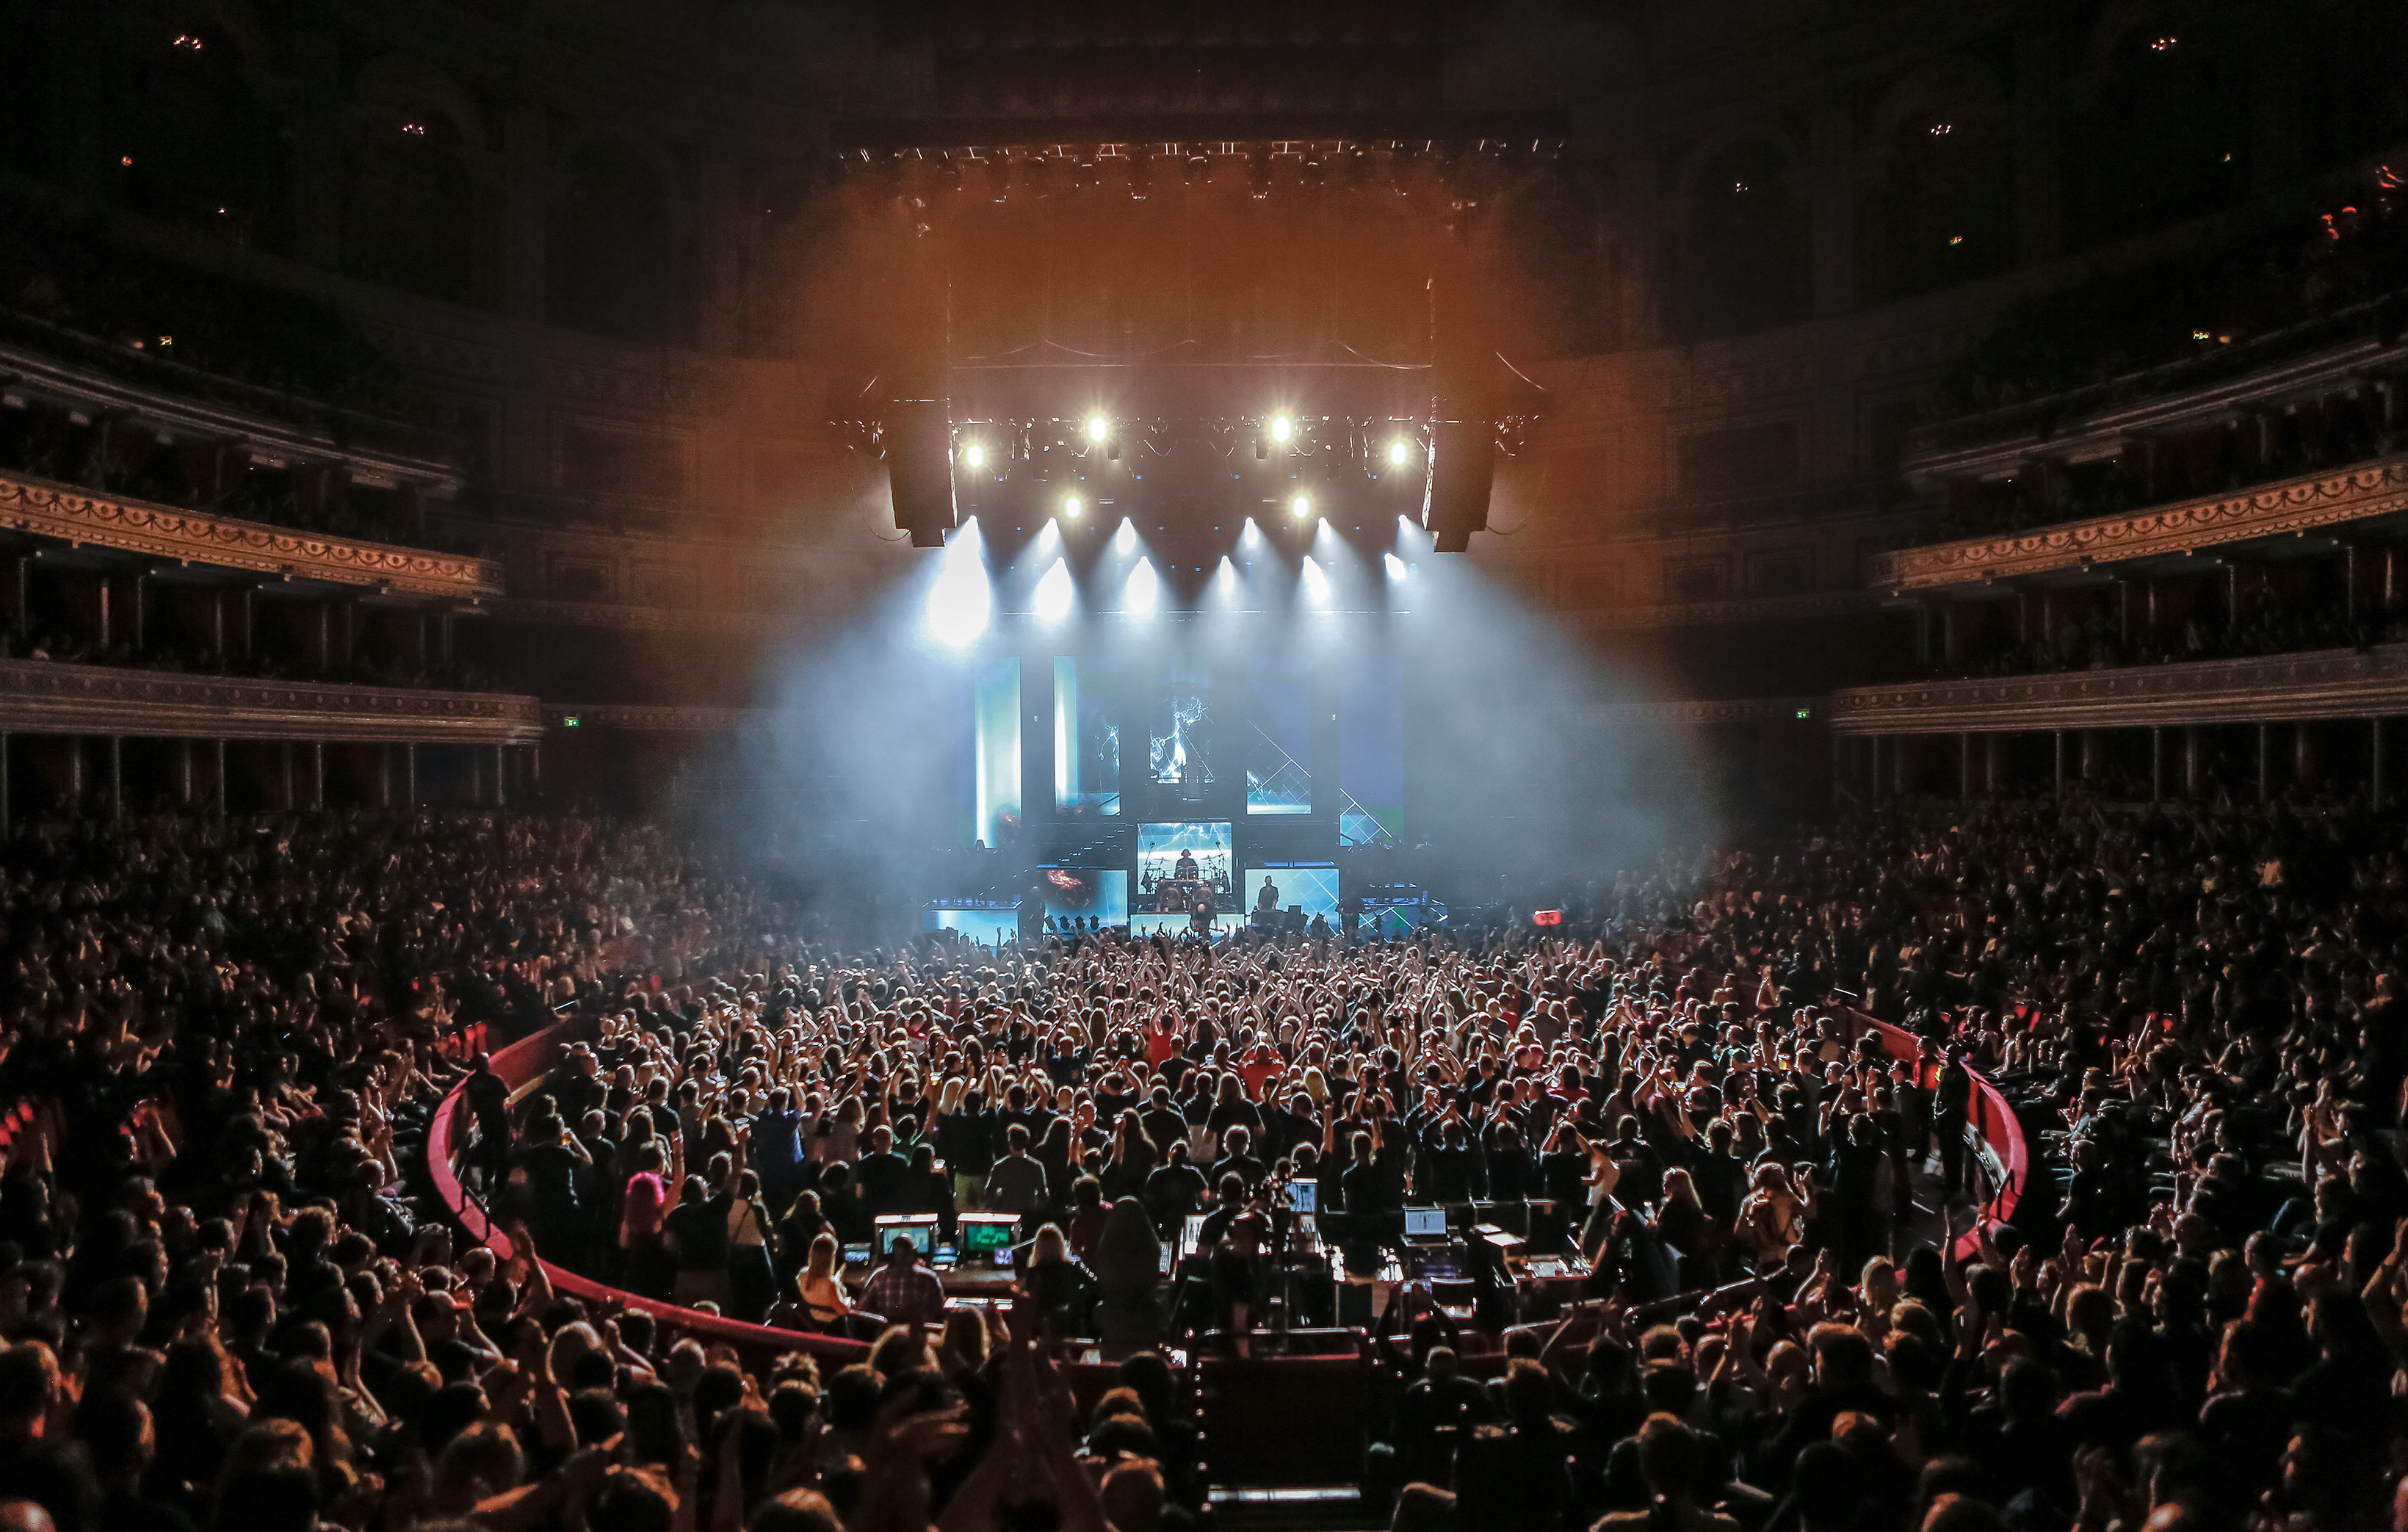 Innervisions Live at Royal Albert Hall